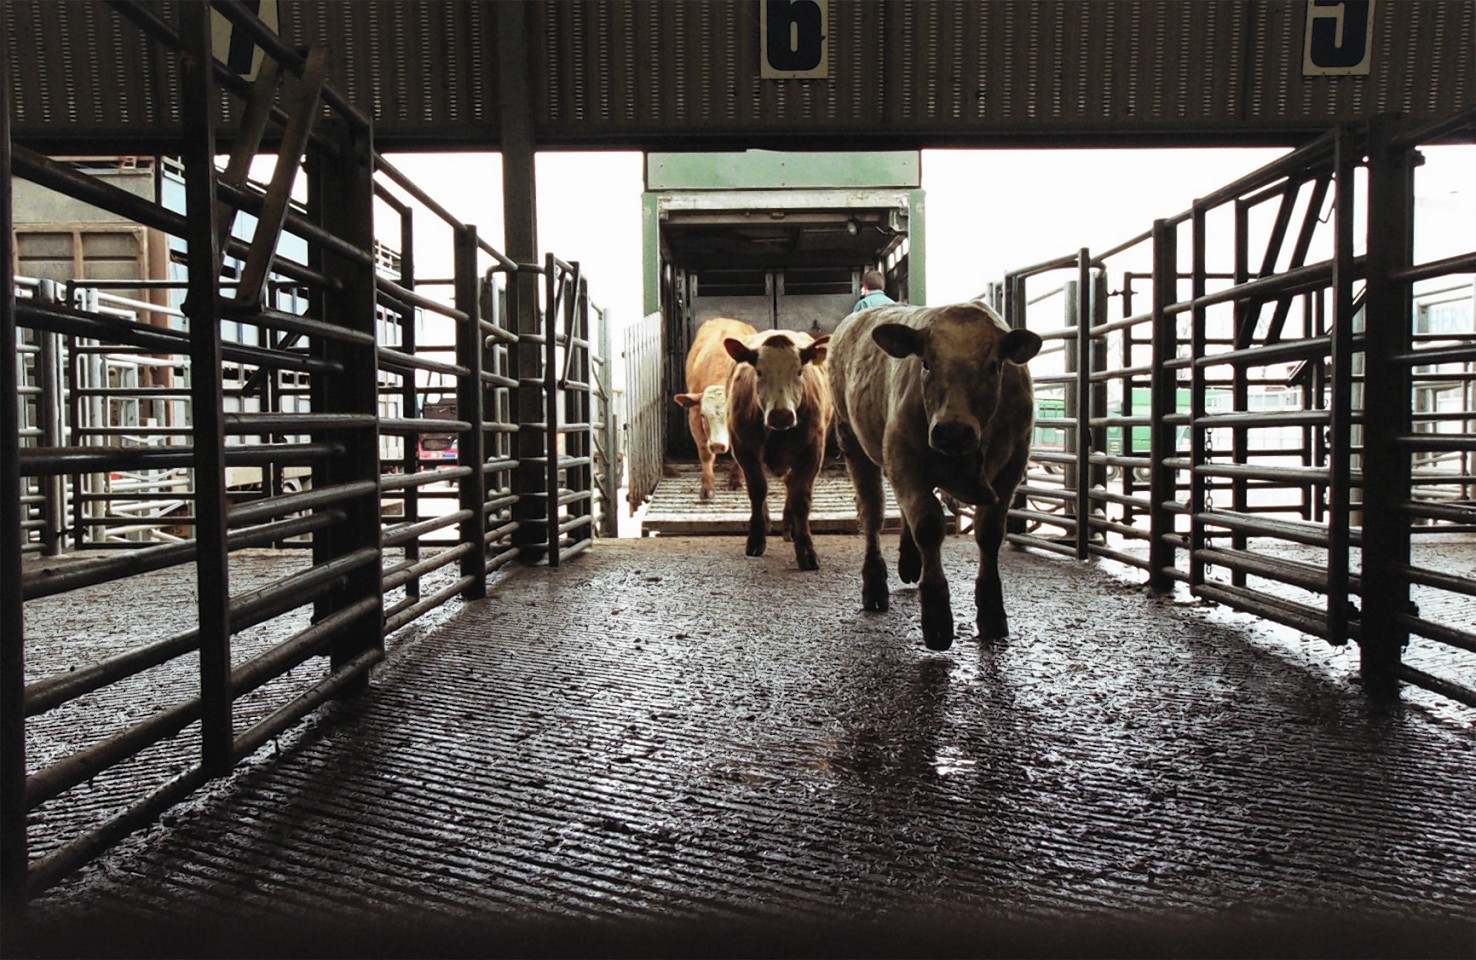 The new cattle movements recording system comes into place at the end of the year.